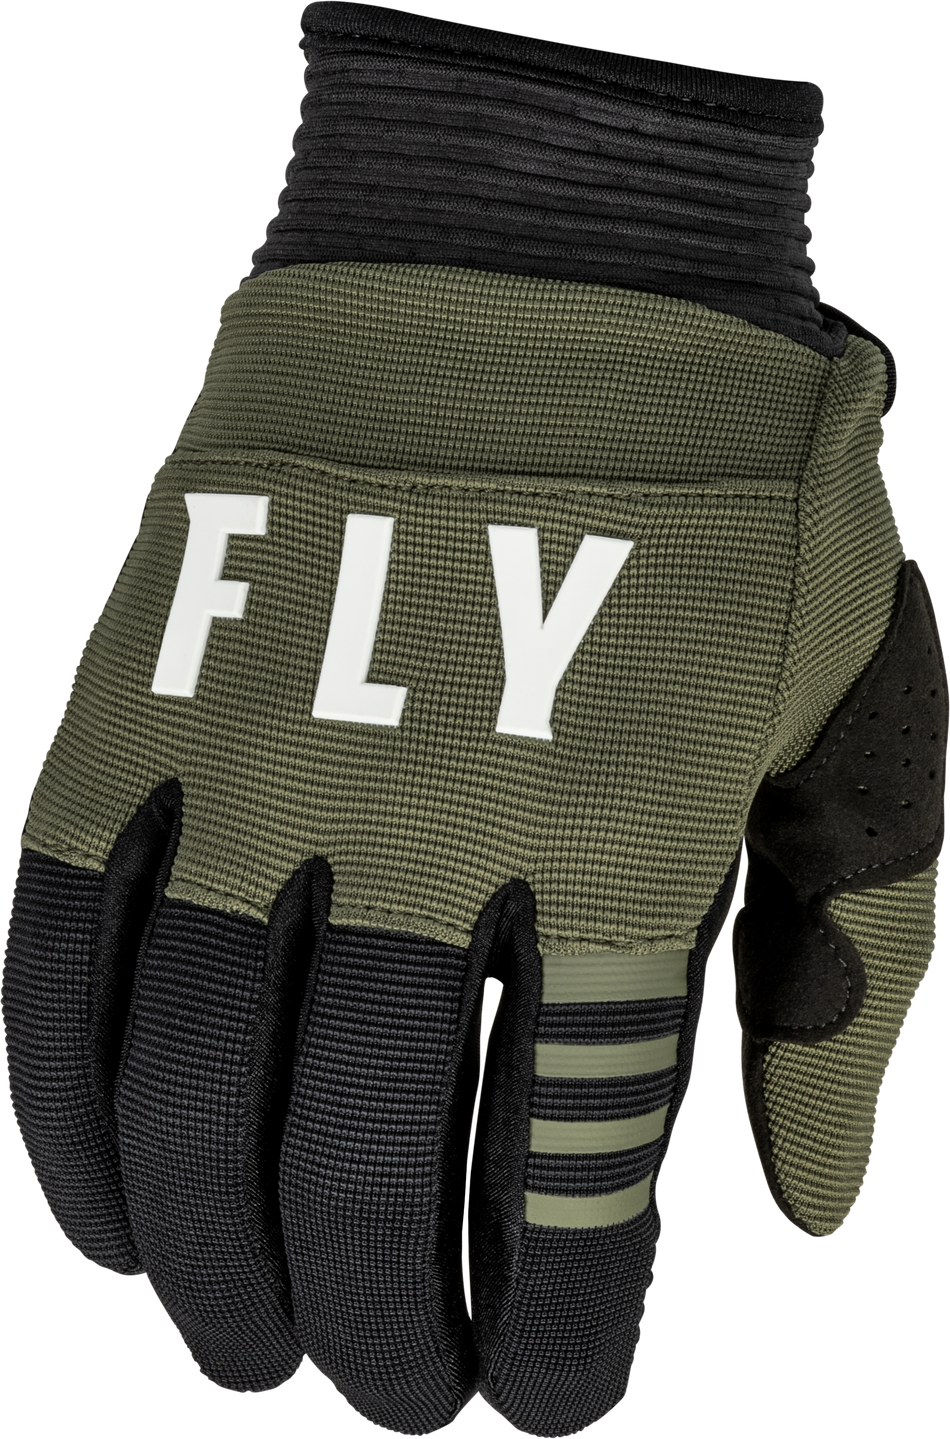 FLY RACING F-16 Gloves Olive Green/Black 3x 376-9133X